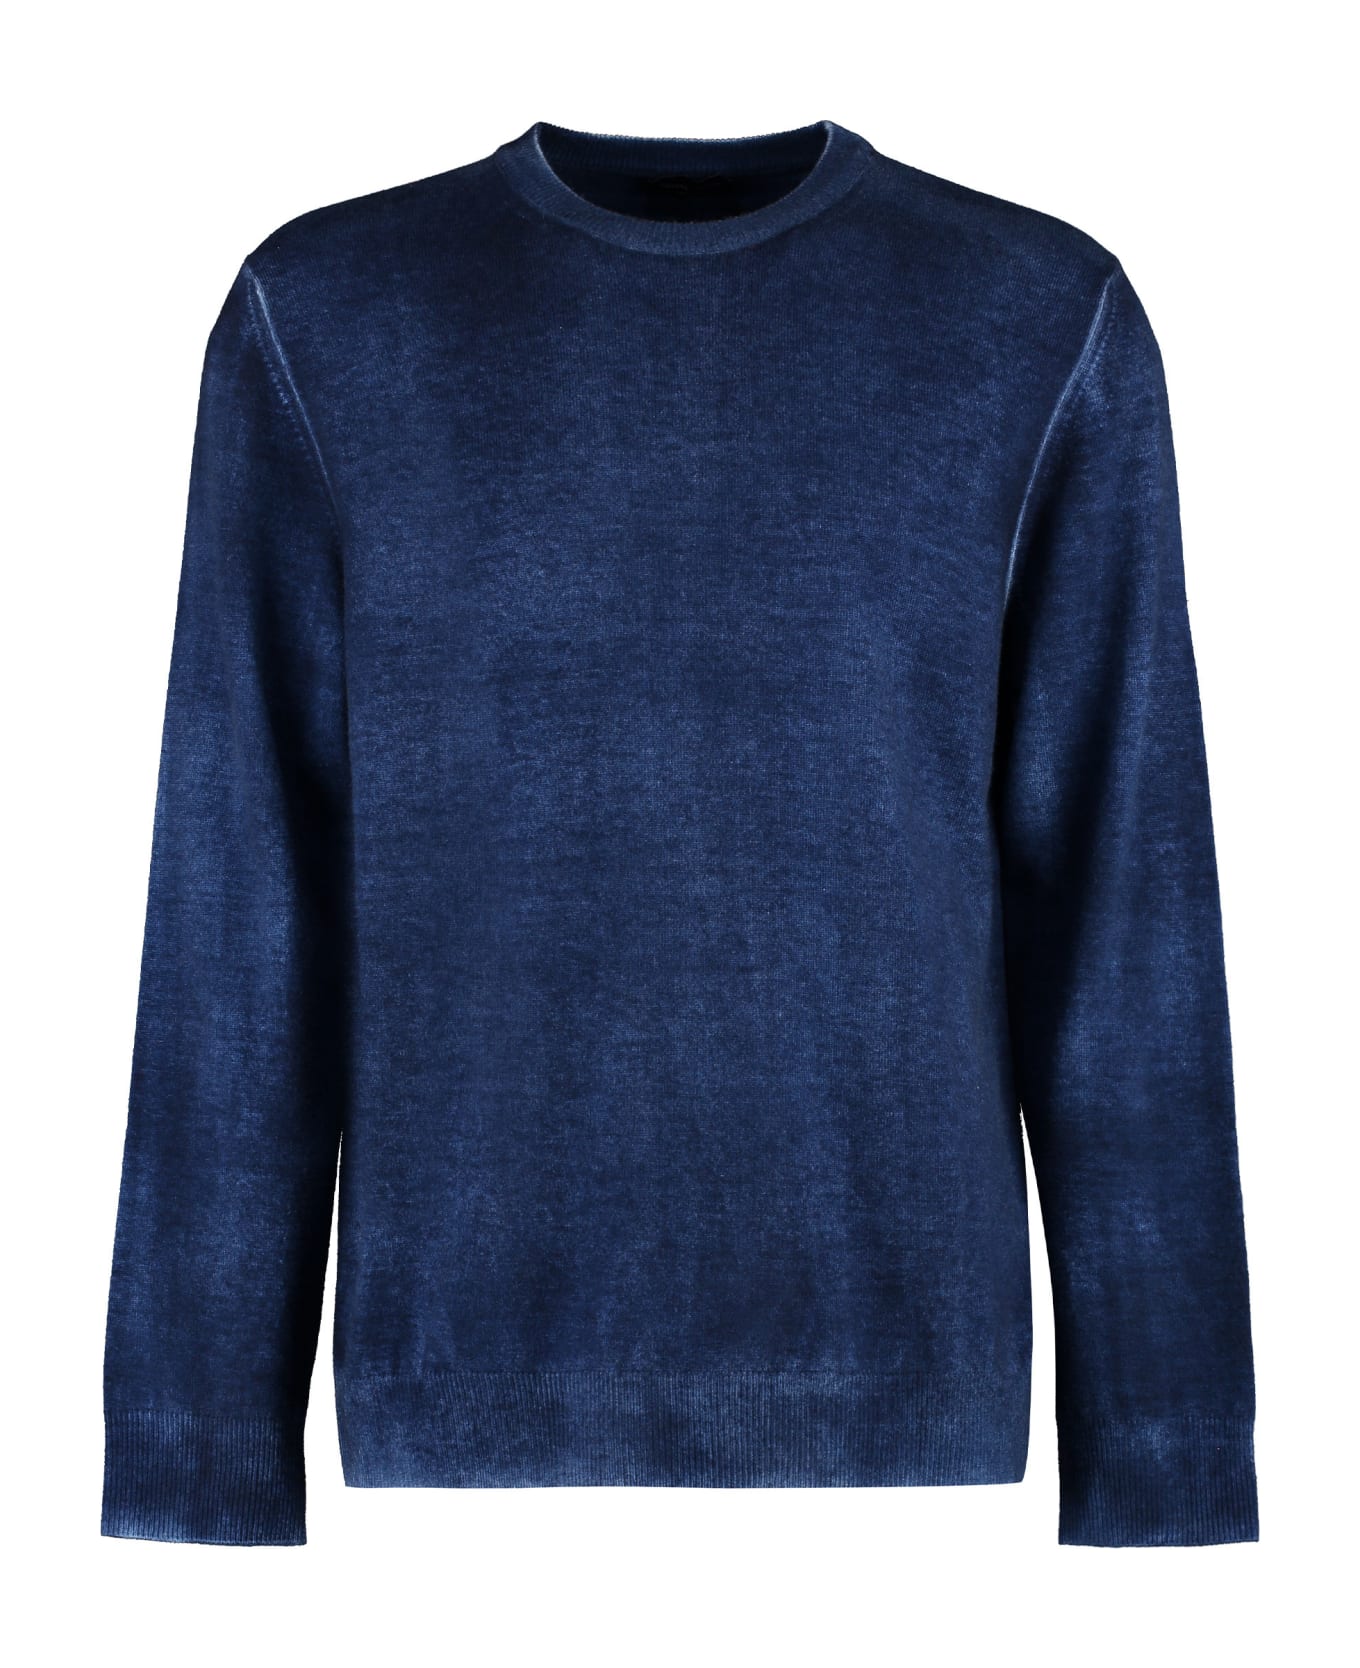 Roberto Collina Wool And Cashmere Sweater - blue